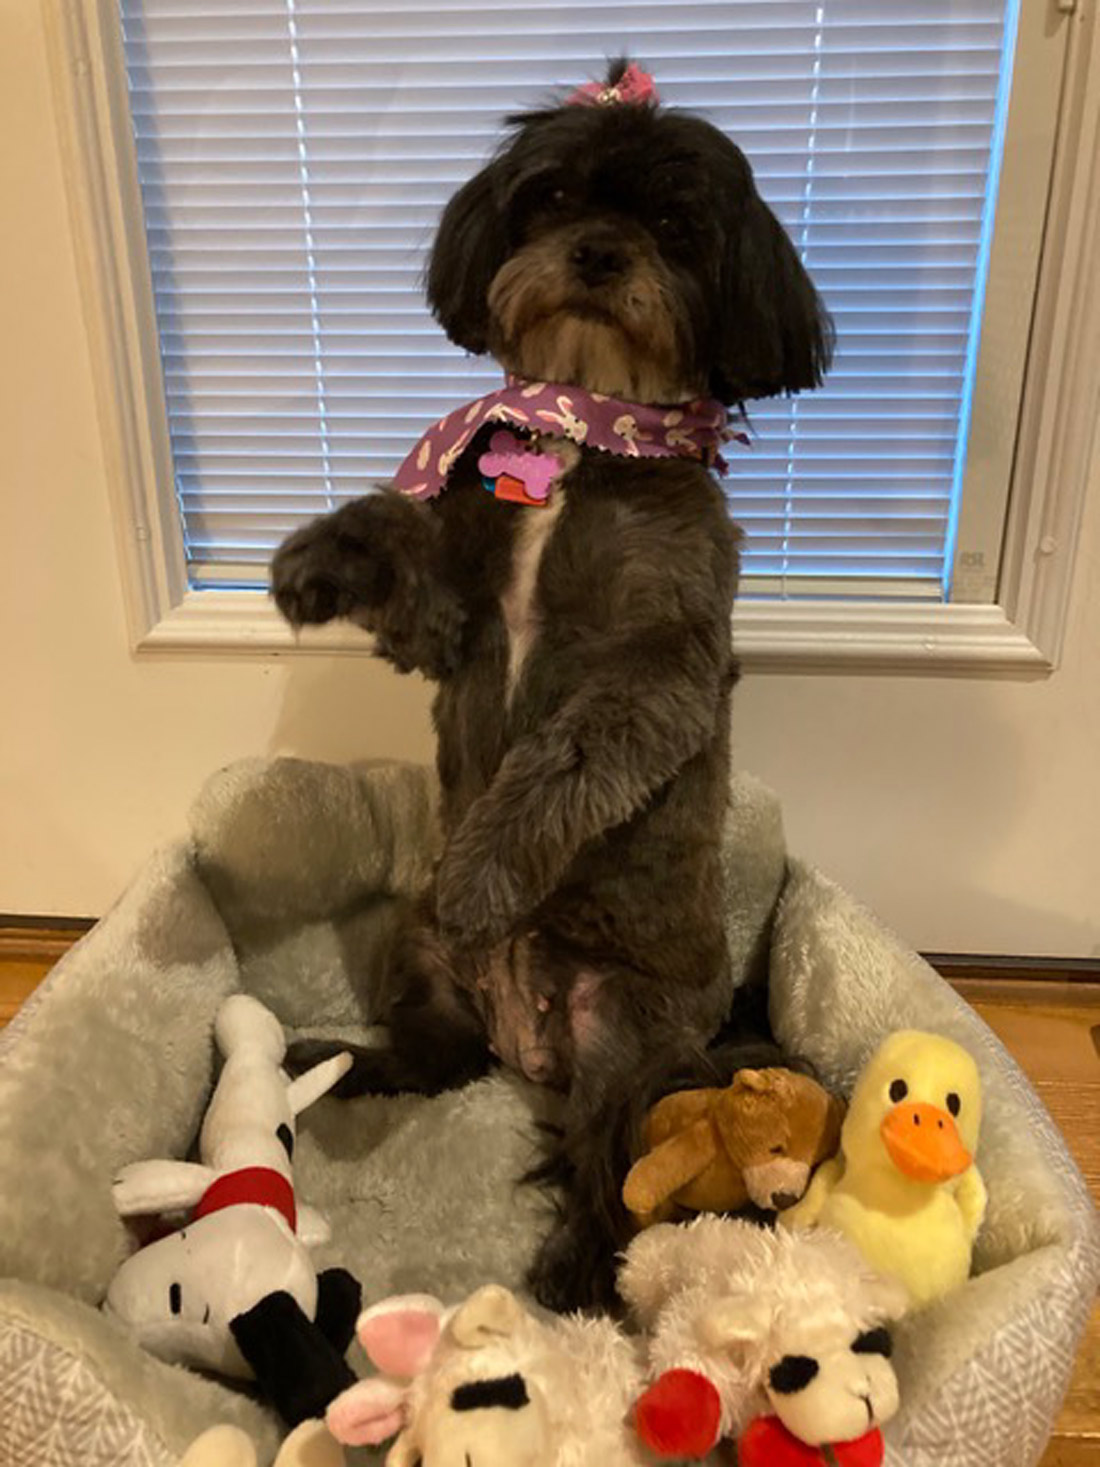 This is Pippa, our grand-dog, in the pose she does when she wants a belly rub or special treat. She’s ten-years-old. Our daughter has had her for about nine months, but she is “family” to all of us. She’s a Lhasa Apso. Love your column! – Judy Kaufman